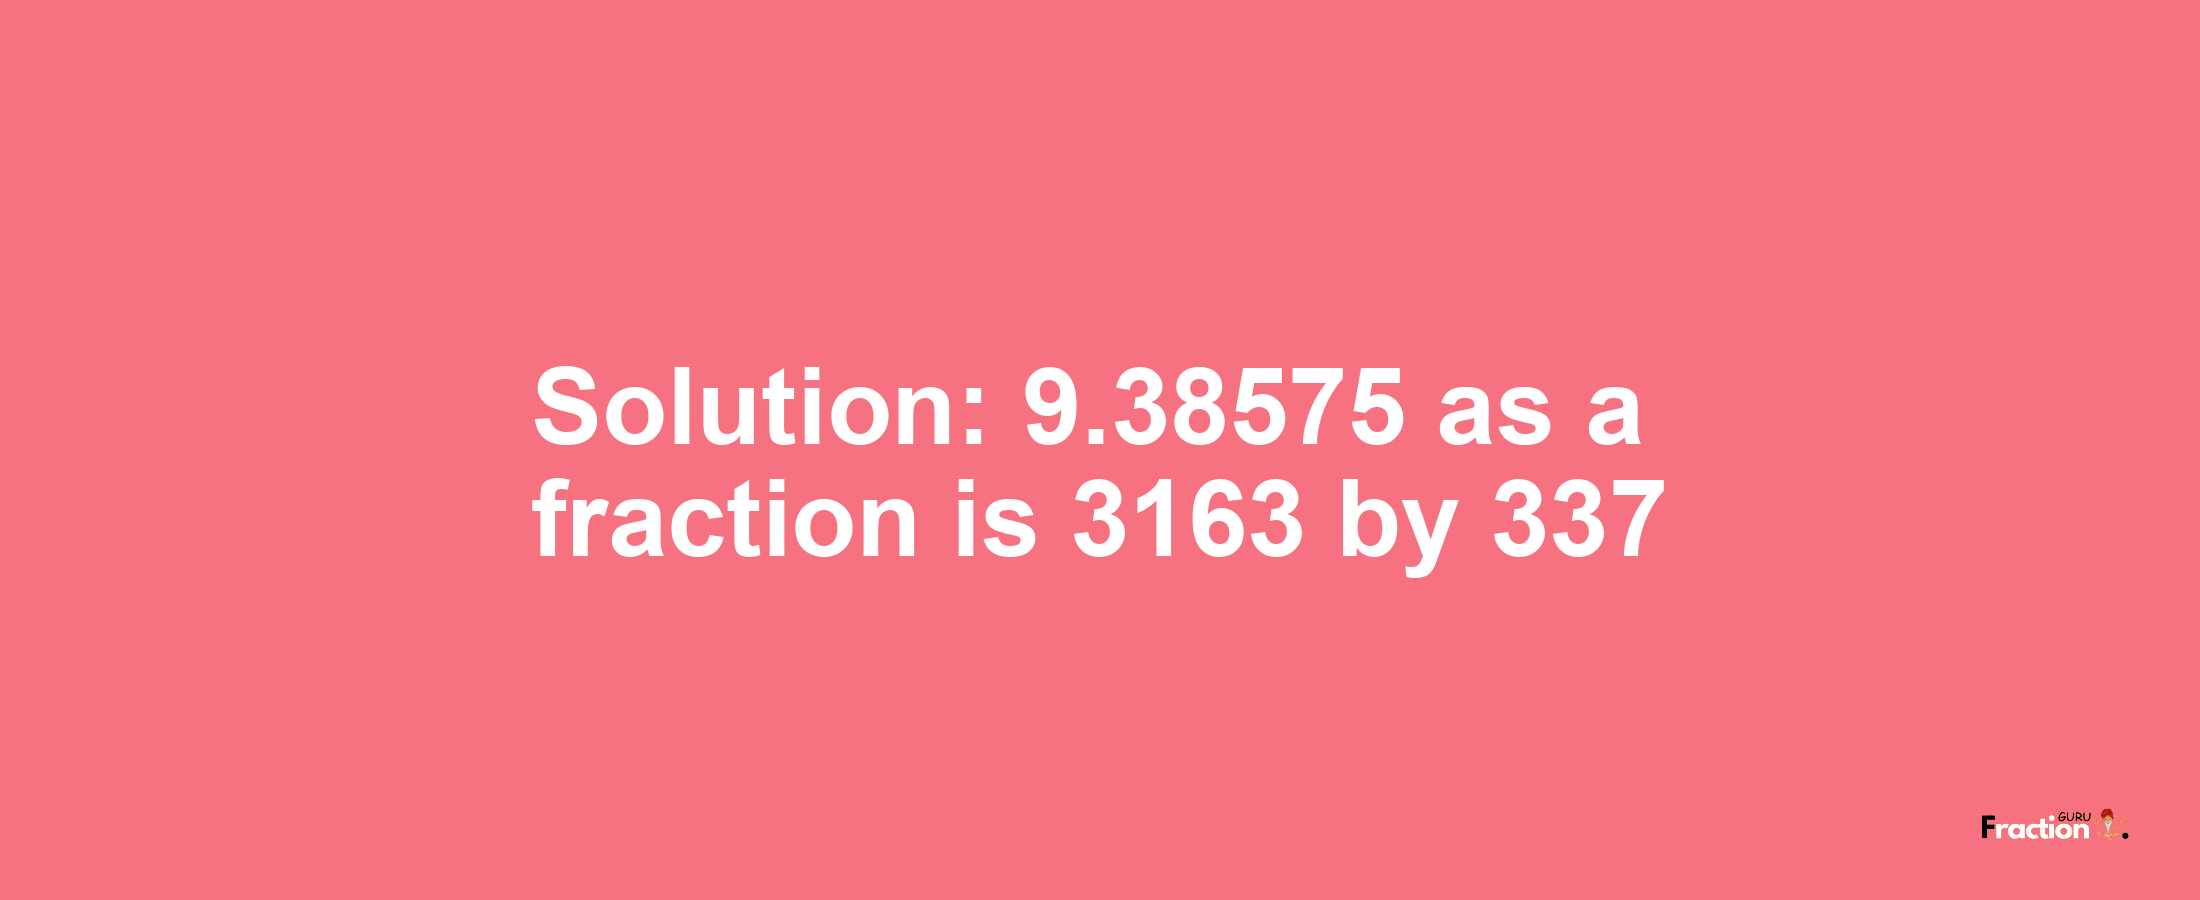 Solution:9.38575 as a fraction is 3163/337